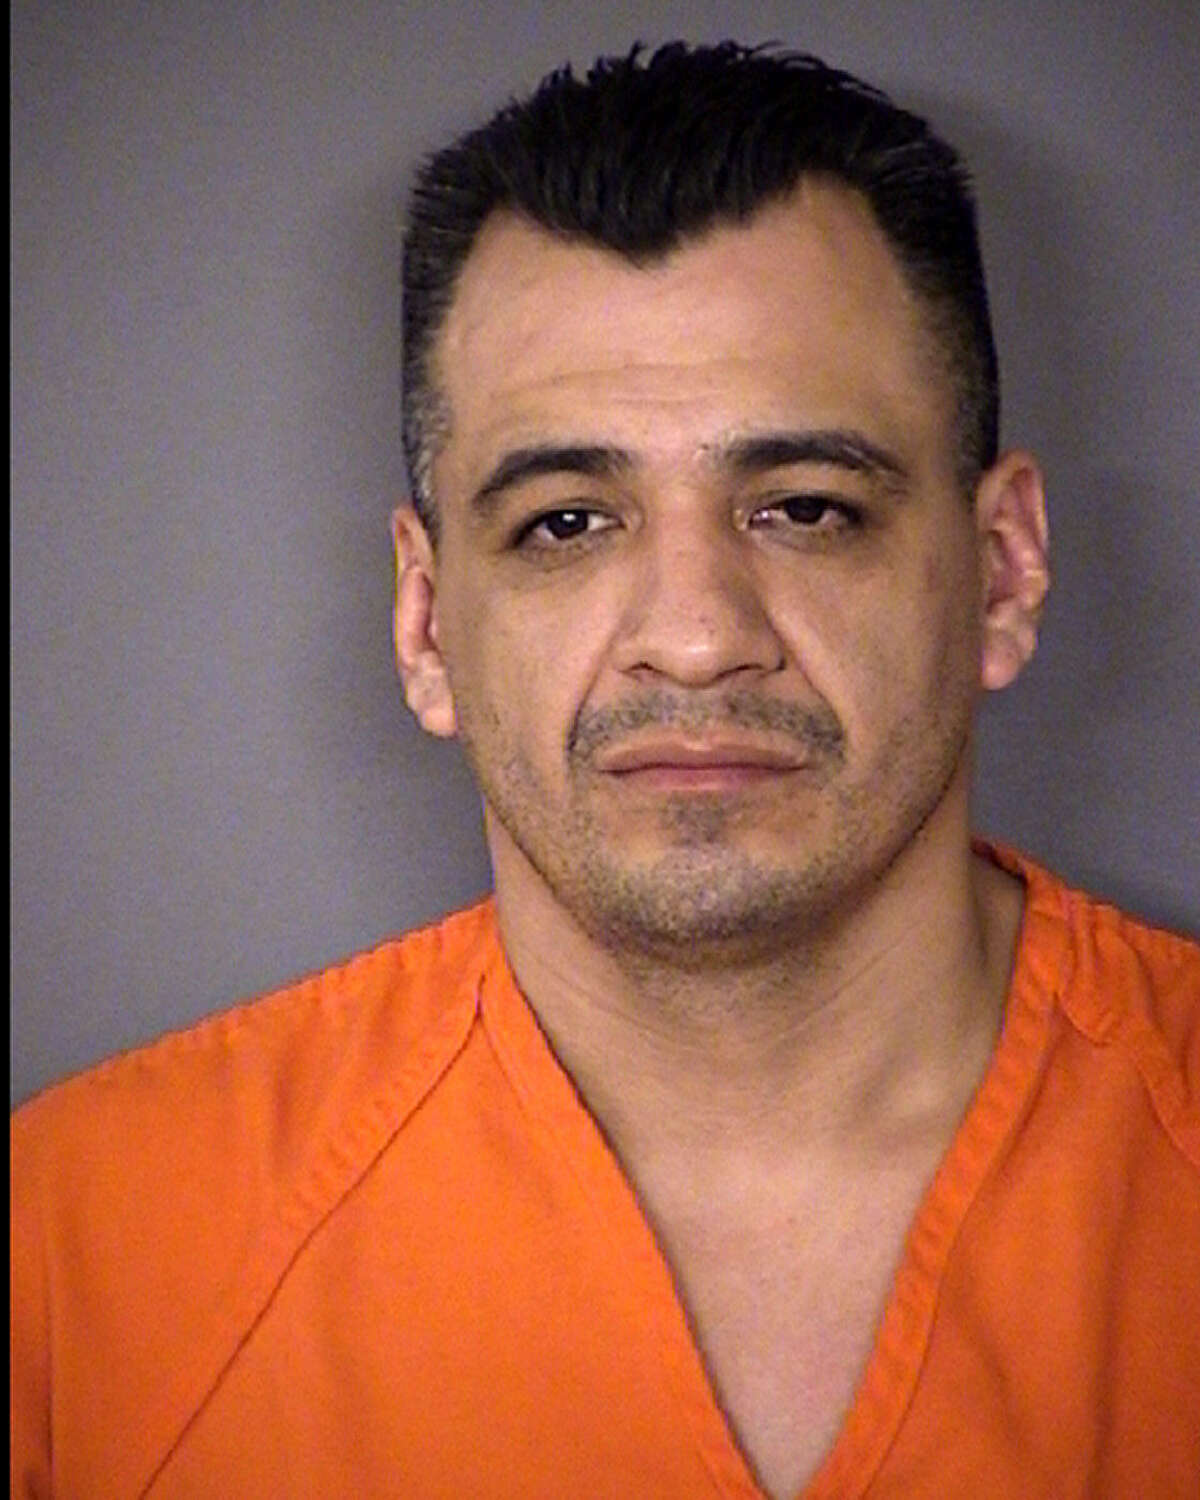 The teen met Frank Lara, 40, during a party at his home on July 4.